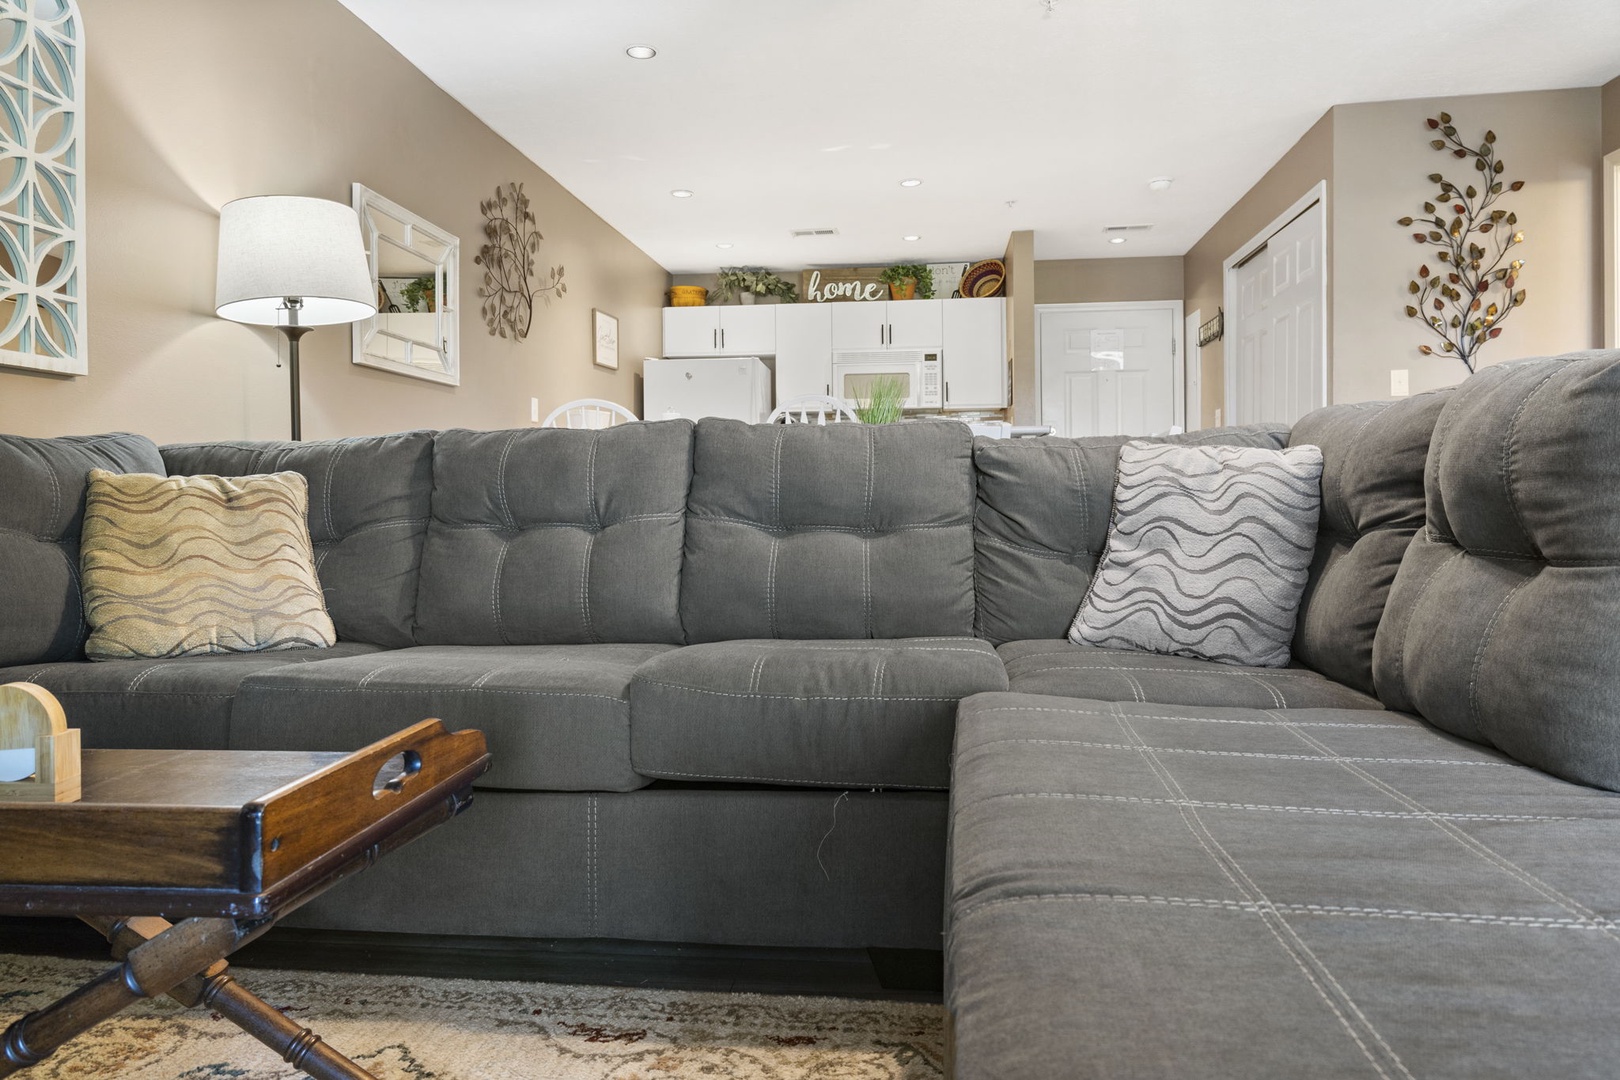 Curl up for a movie or take a snooze on the Queen-Size Sleeper Sofa in the Living Room